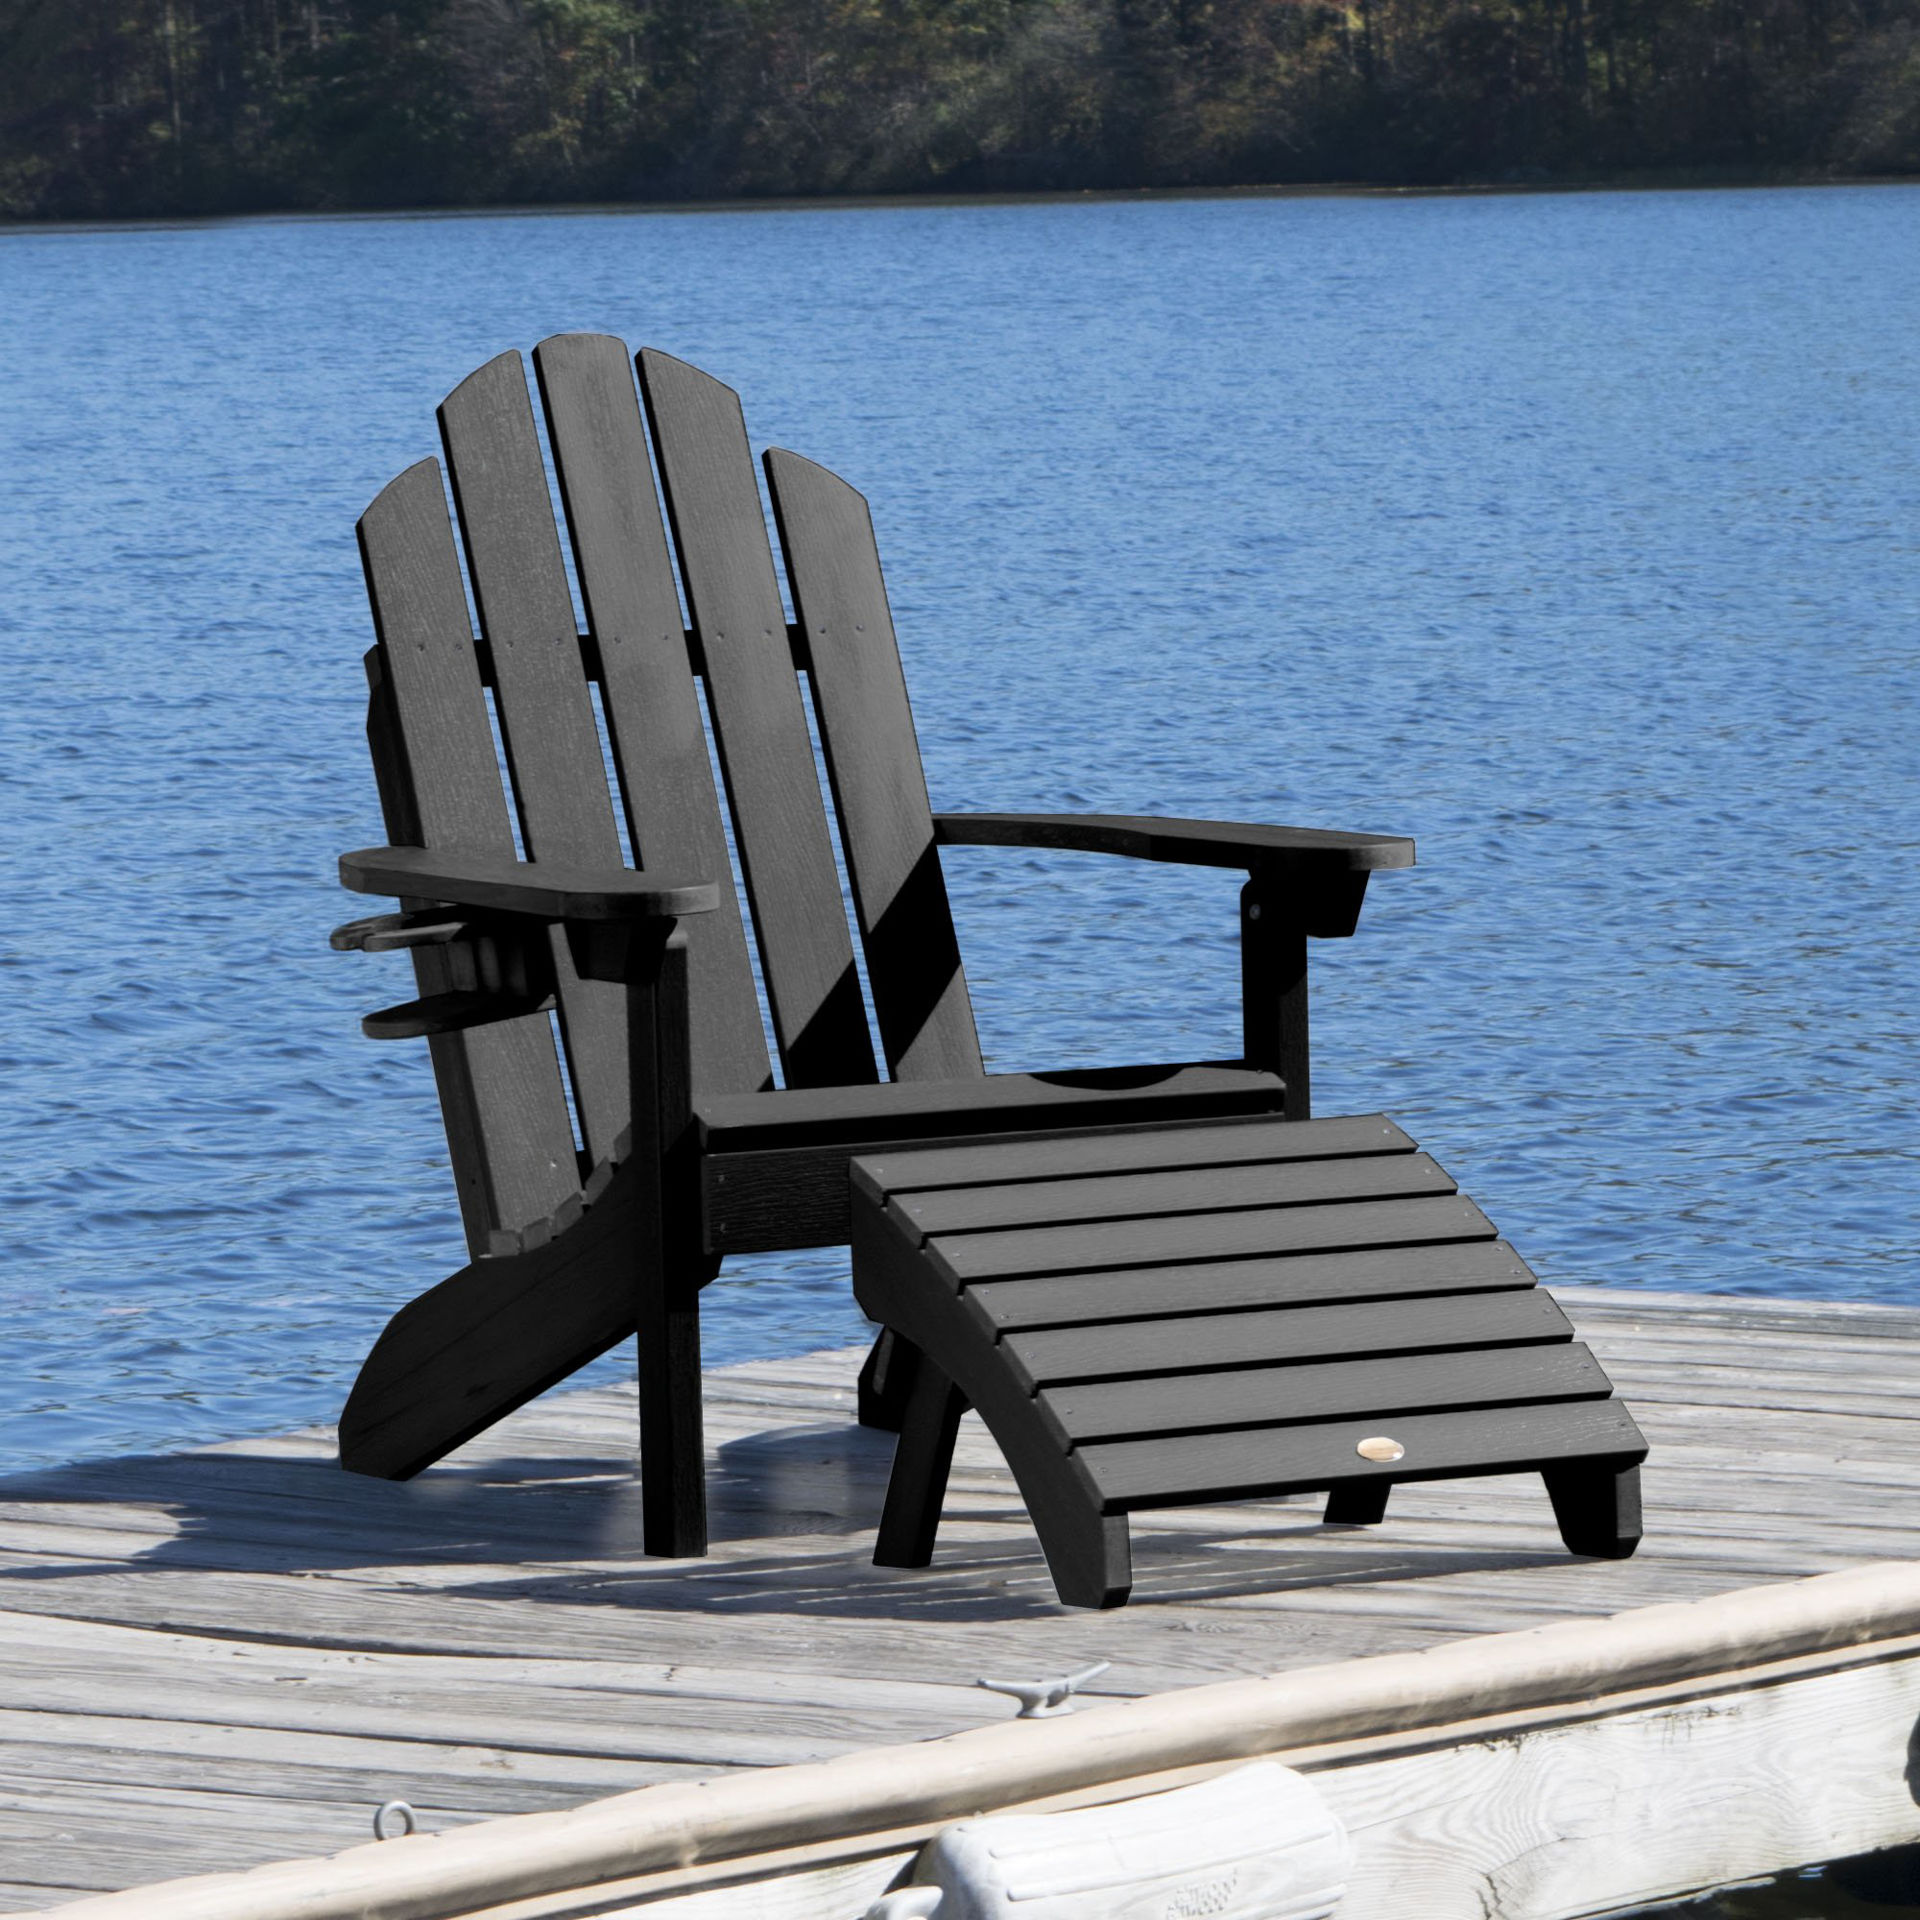 Buy Classic Westport Adirondack Chair With Cup Holder And Folding Adirondack Ottoman By Highwood